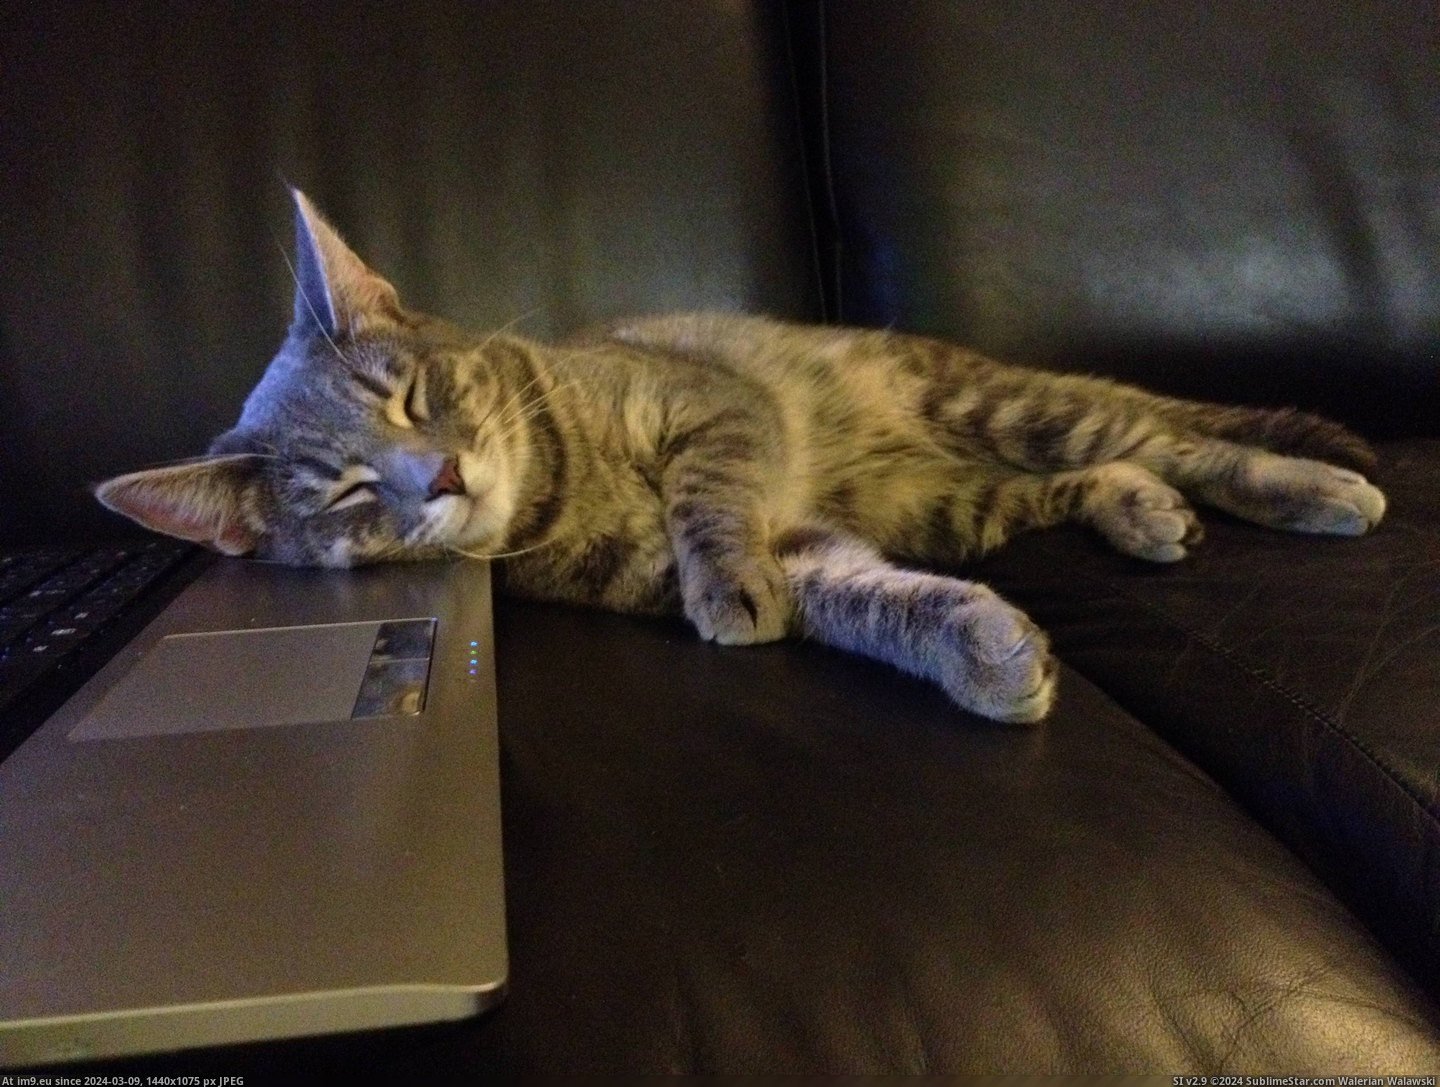 #Cats #Cat #Girlfriend #Passing #Keyboards #Week #Adopted #Addicted [Cats] My girlfriend and I adopted a cat last week. He's already addicted to Reddit and passing out on keyboards. Pic. (Image of album My r/CATS favs))